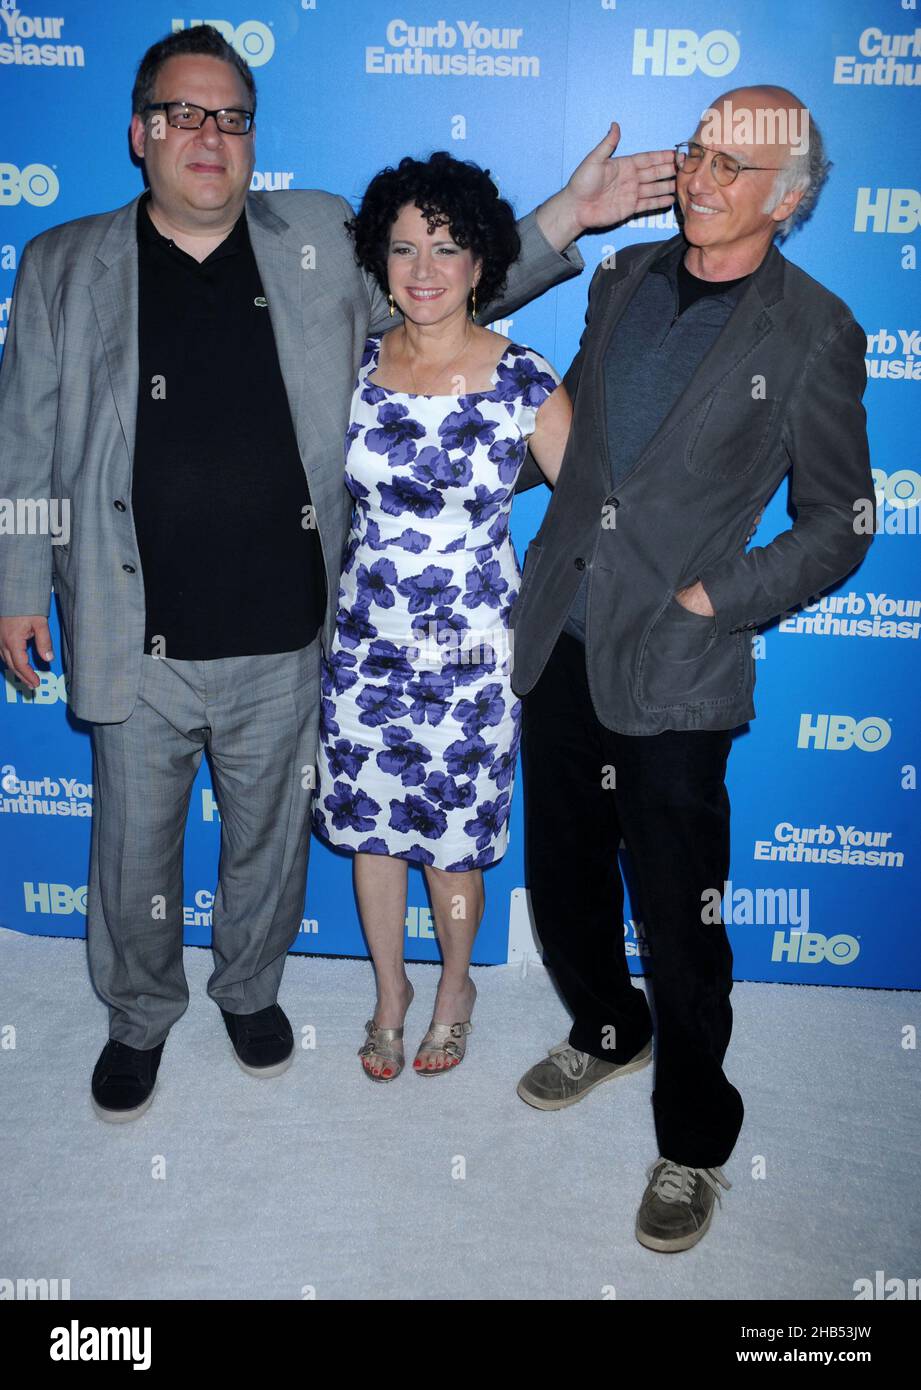 Manhattan, United States Of America. 06th July, 2011. NEW YORK, NY - JULY 06: Jeff Garlin Susie Essman Larry David attends the 'Curb Your Enthusiasm' Season 8 premiere at the Time Warner Screening Room on July 6, 2011 in New York City People: Jeff Garlin Susie Essman Larry David Credit: Storms Media Group/Alamy Live News Stock Photo